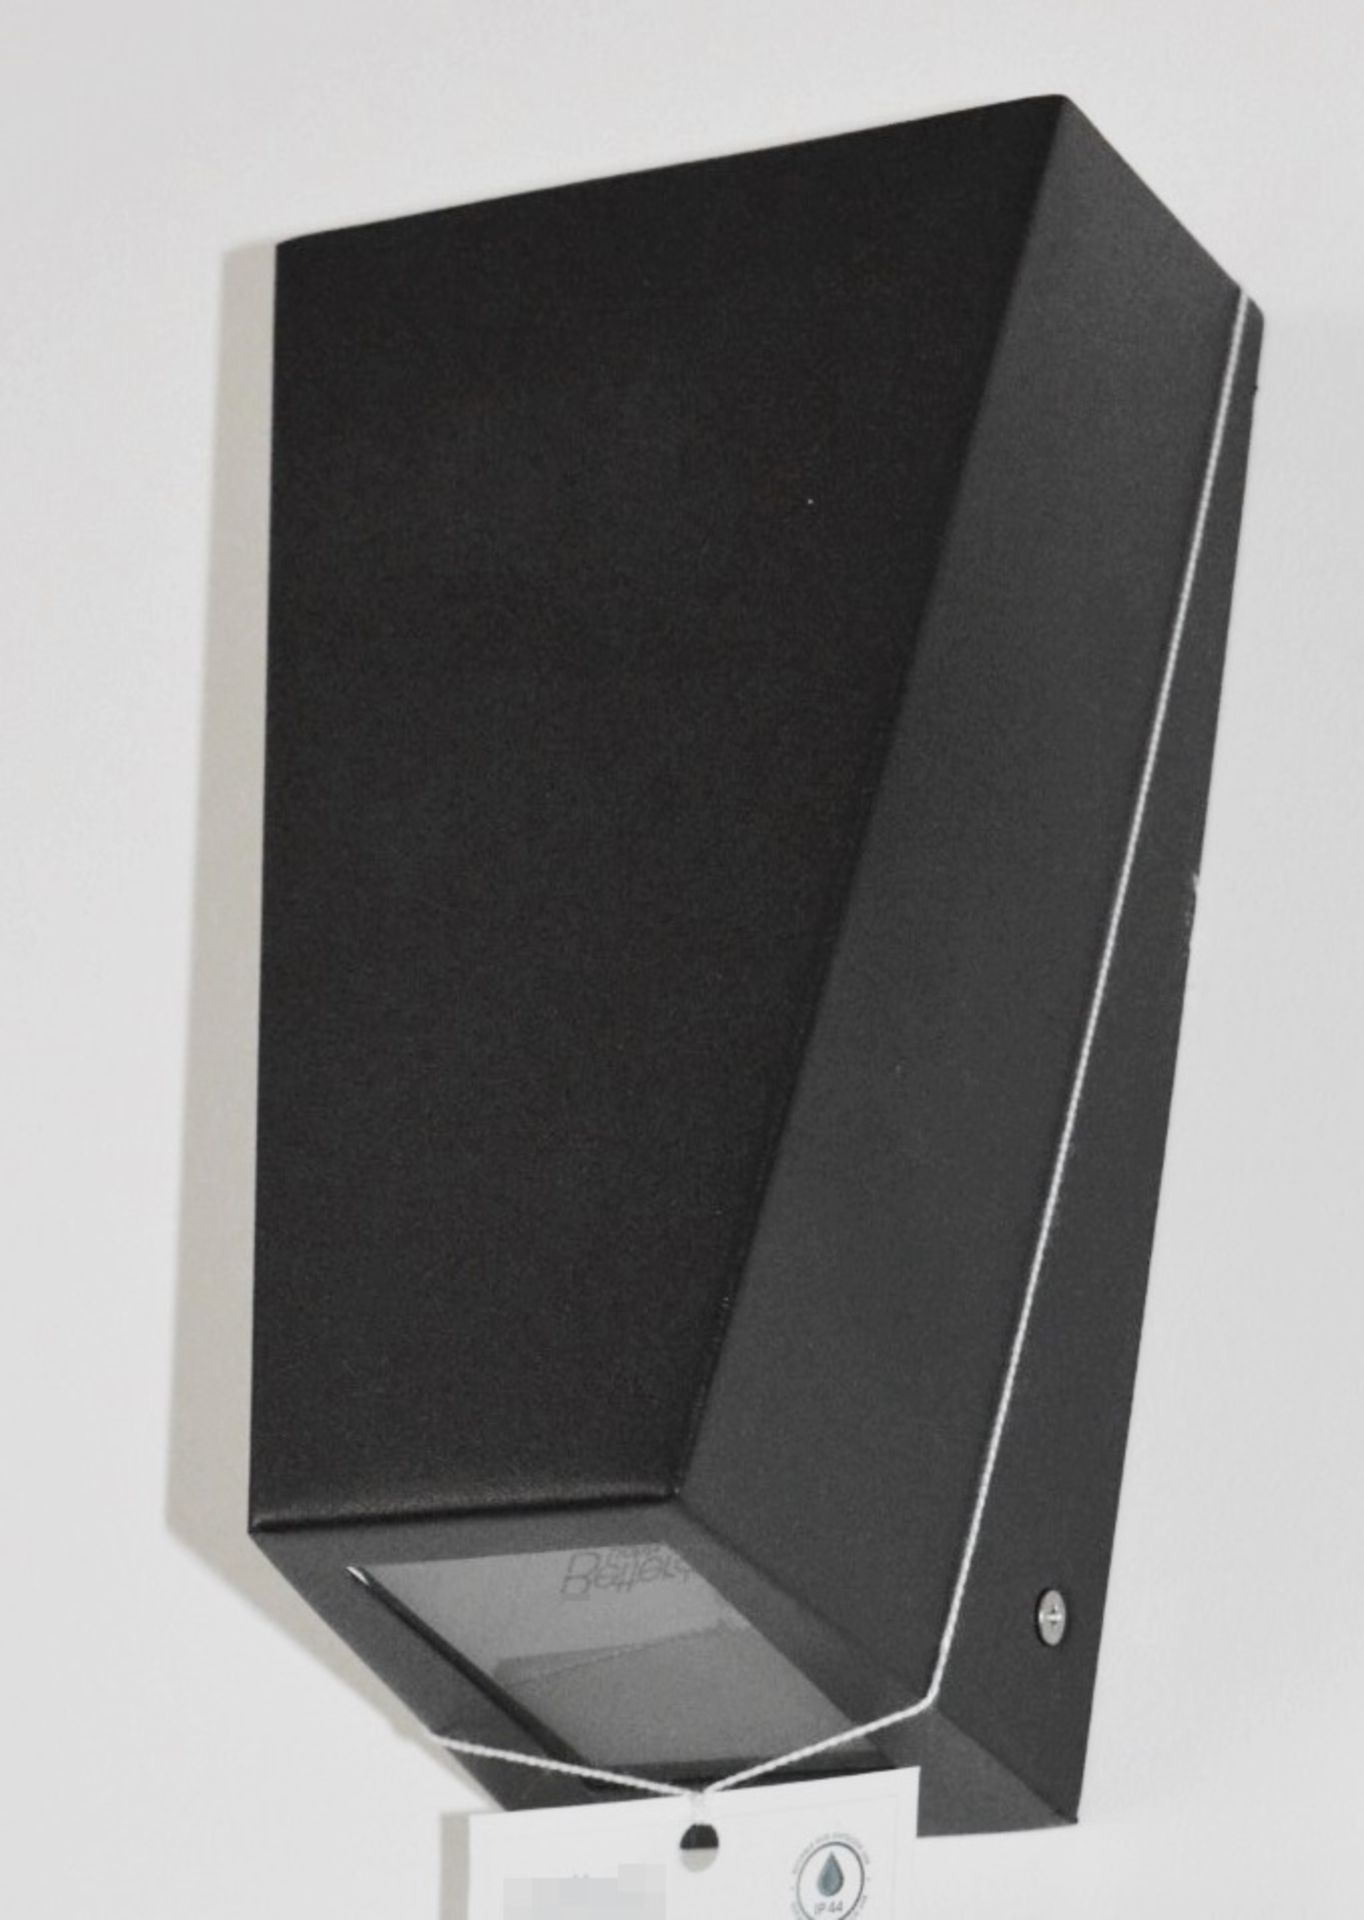 1 x Black IP44 2-Light Outdoor Wall Bracket With Frosted Glass - Ex Display Stock - Ref: J219 - Image 2 of 2